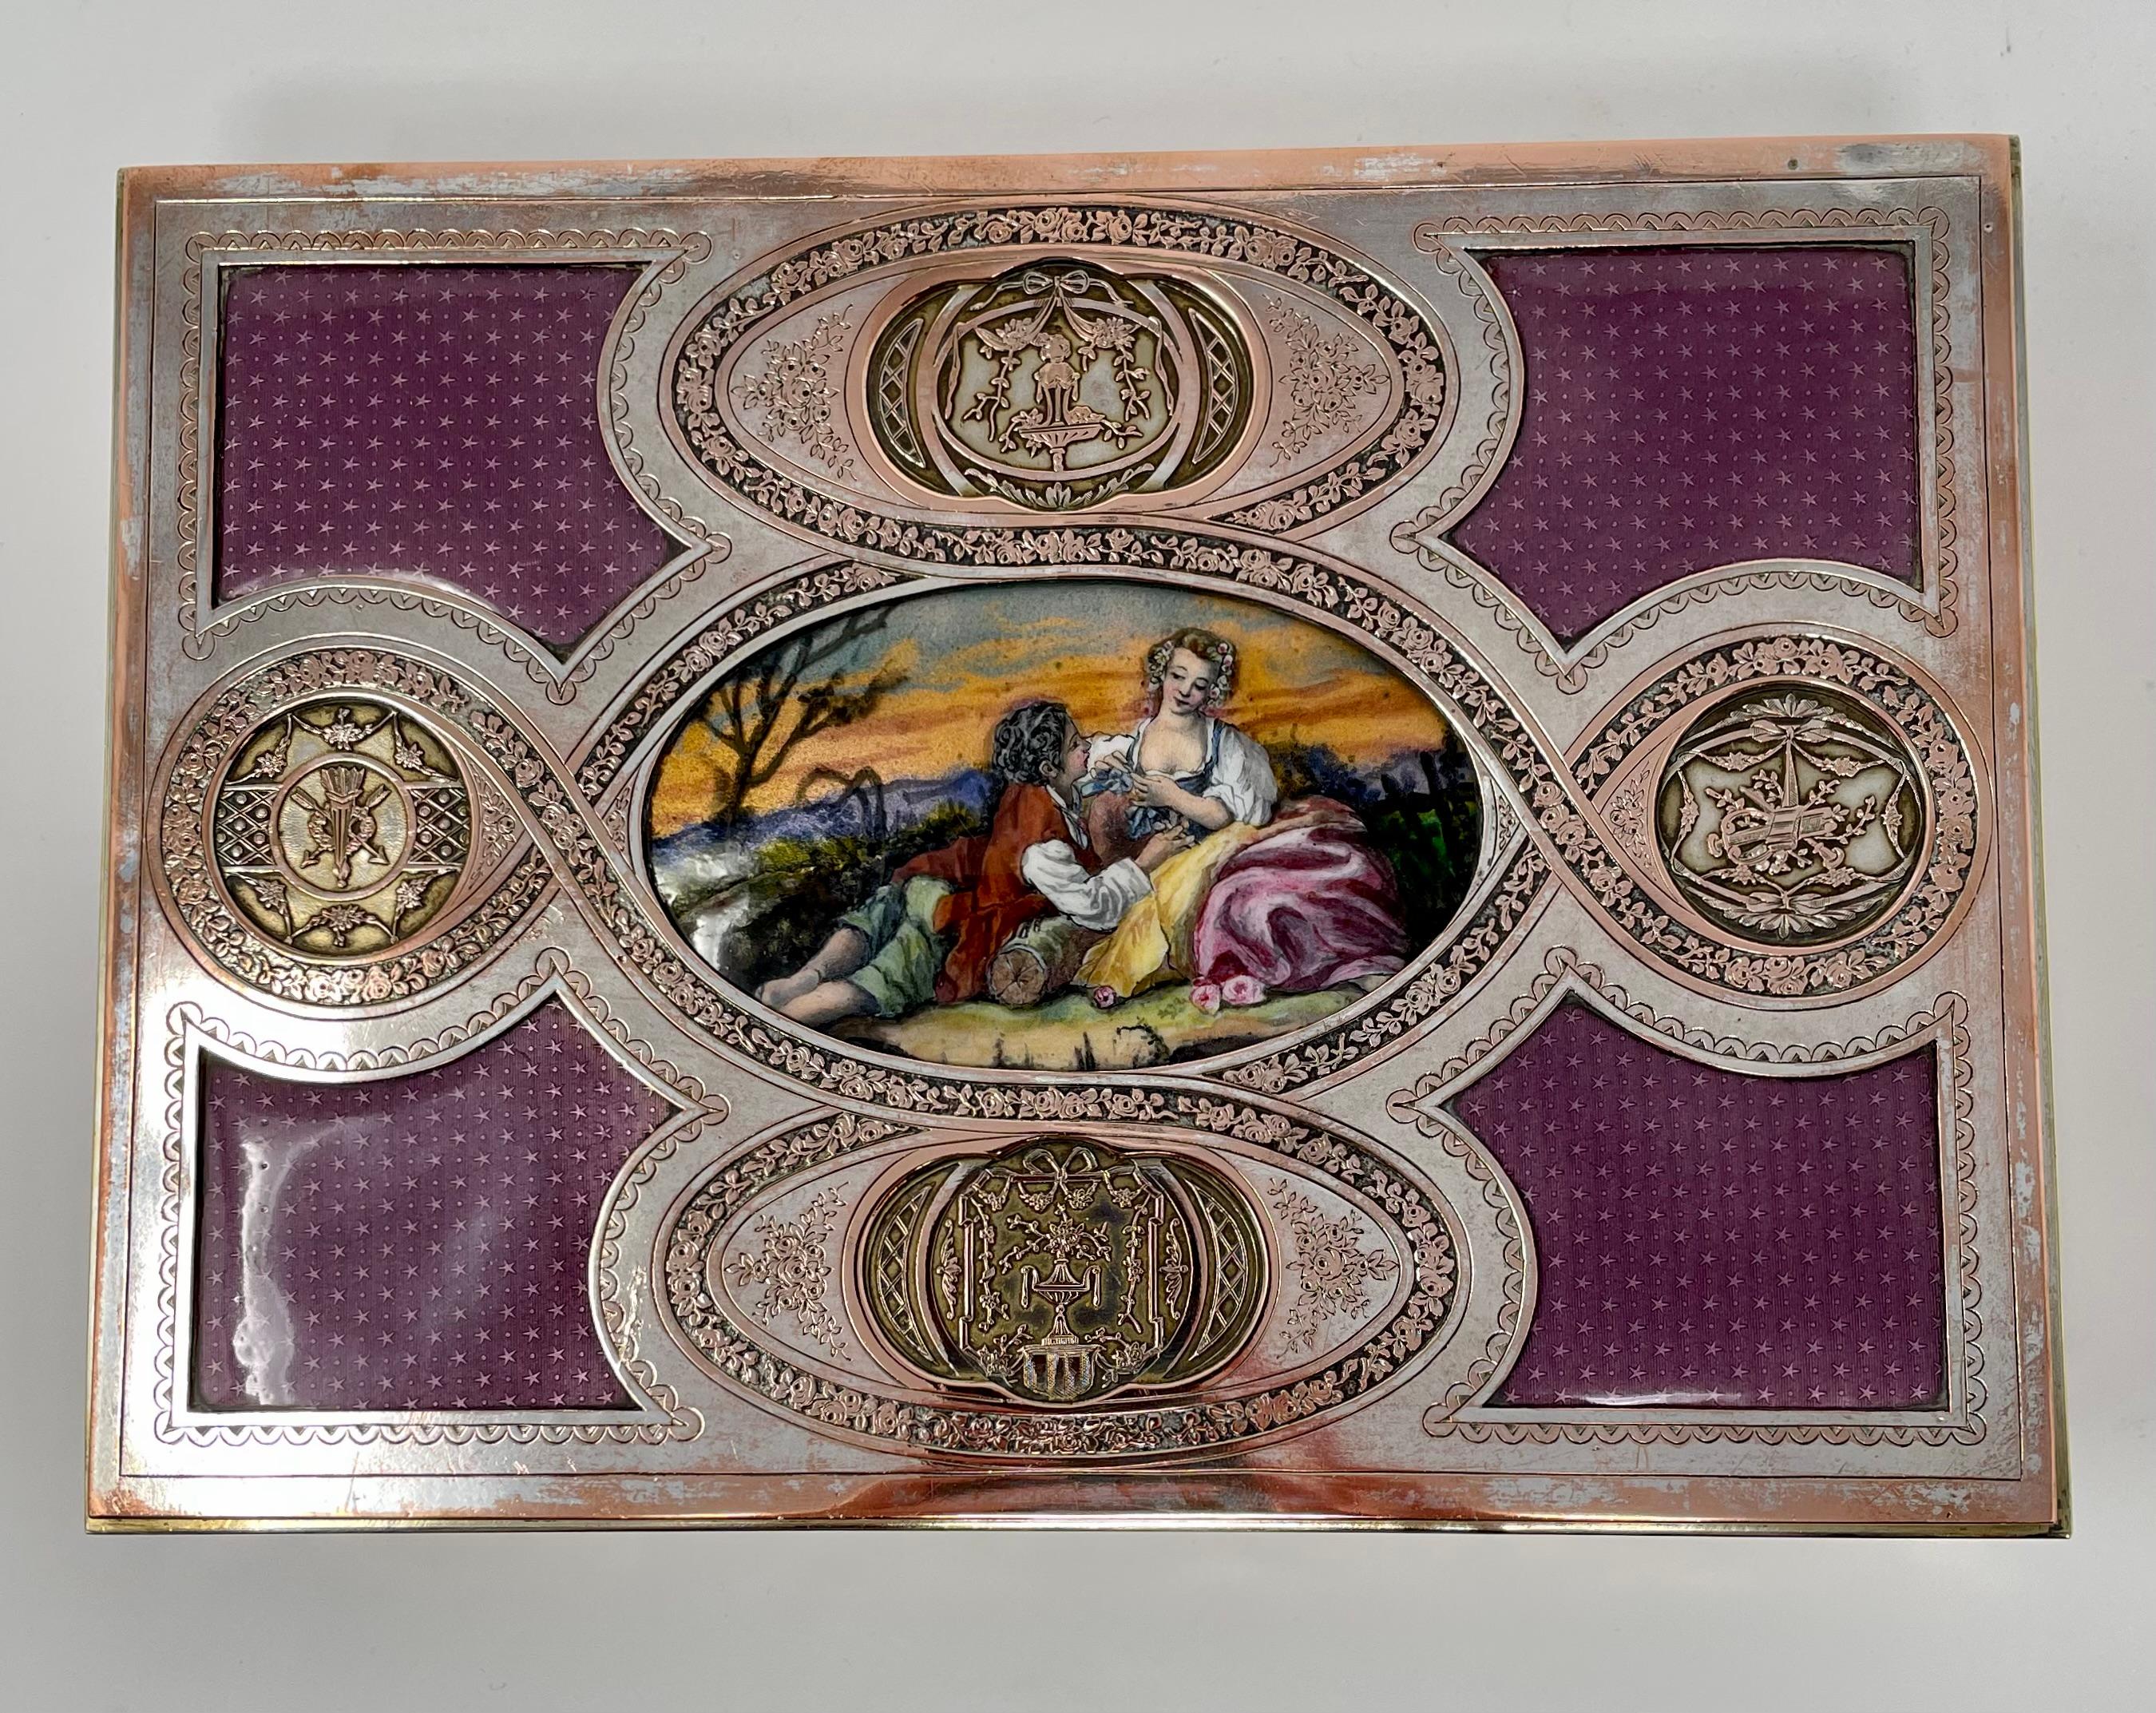 This is a lovely box, and made us think of the quality of Faberge products.